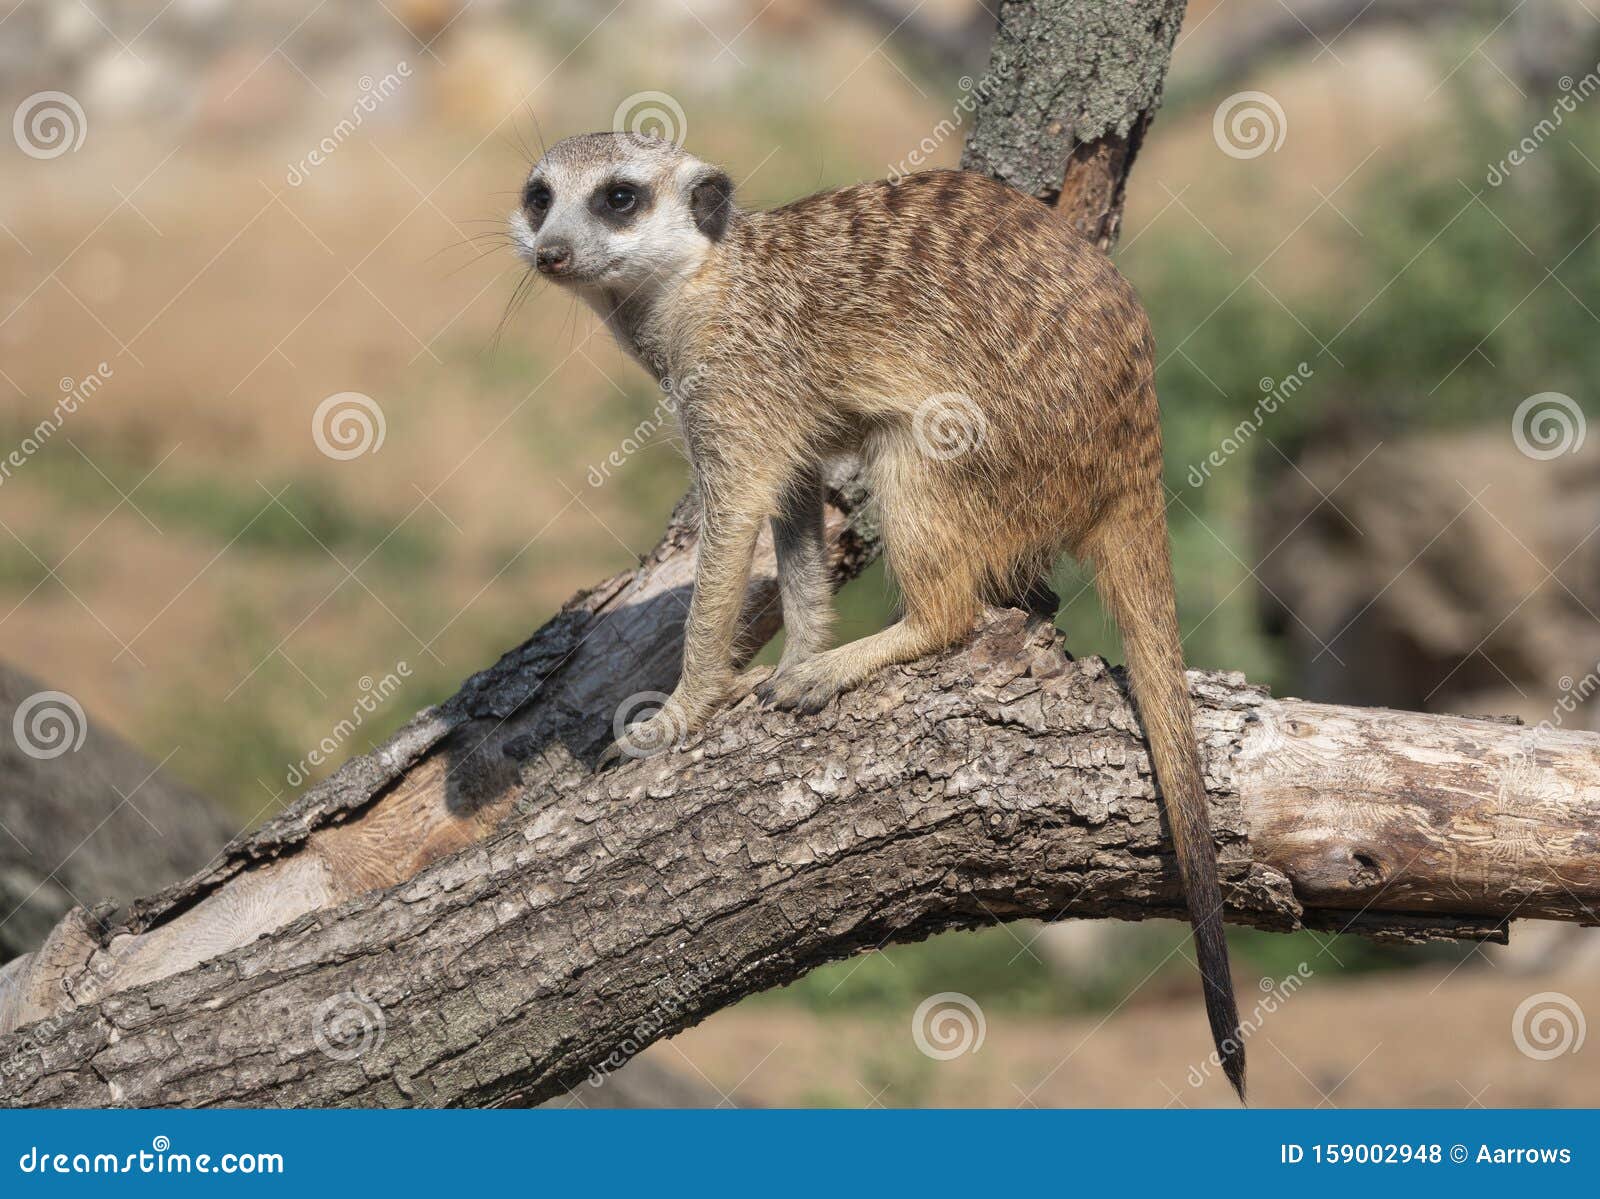 meerkat or suricate is a small carnivoran belonging to the mongoose family